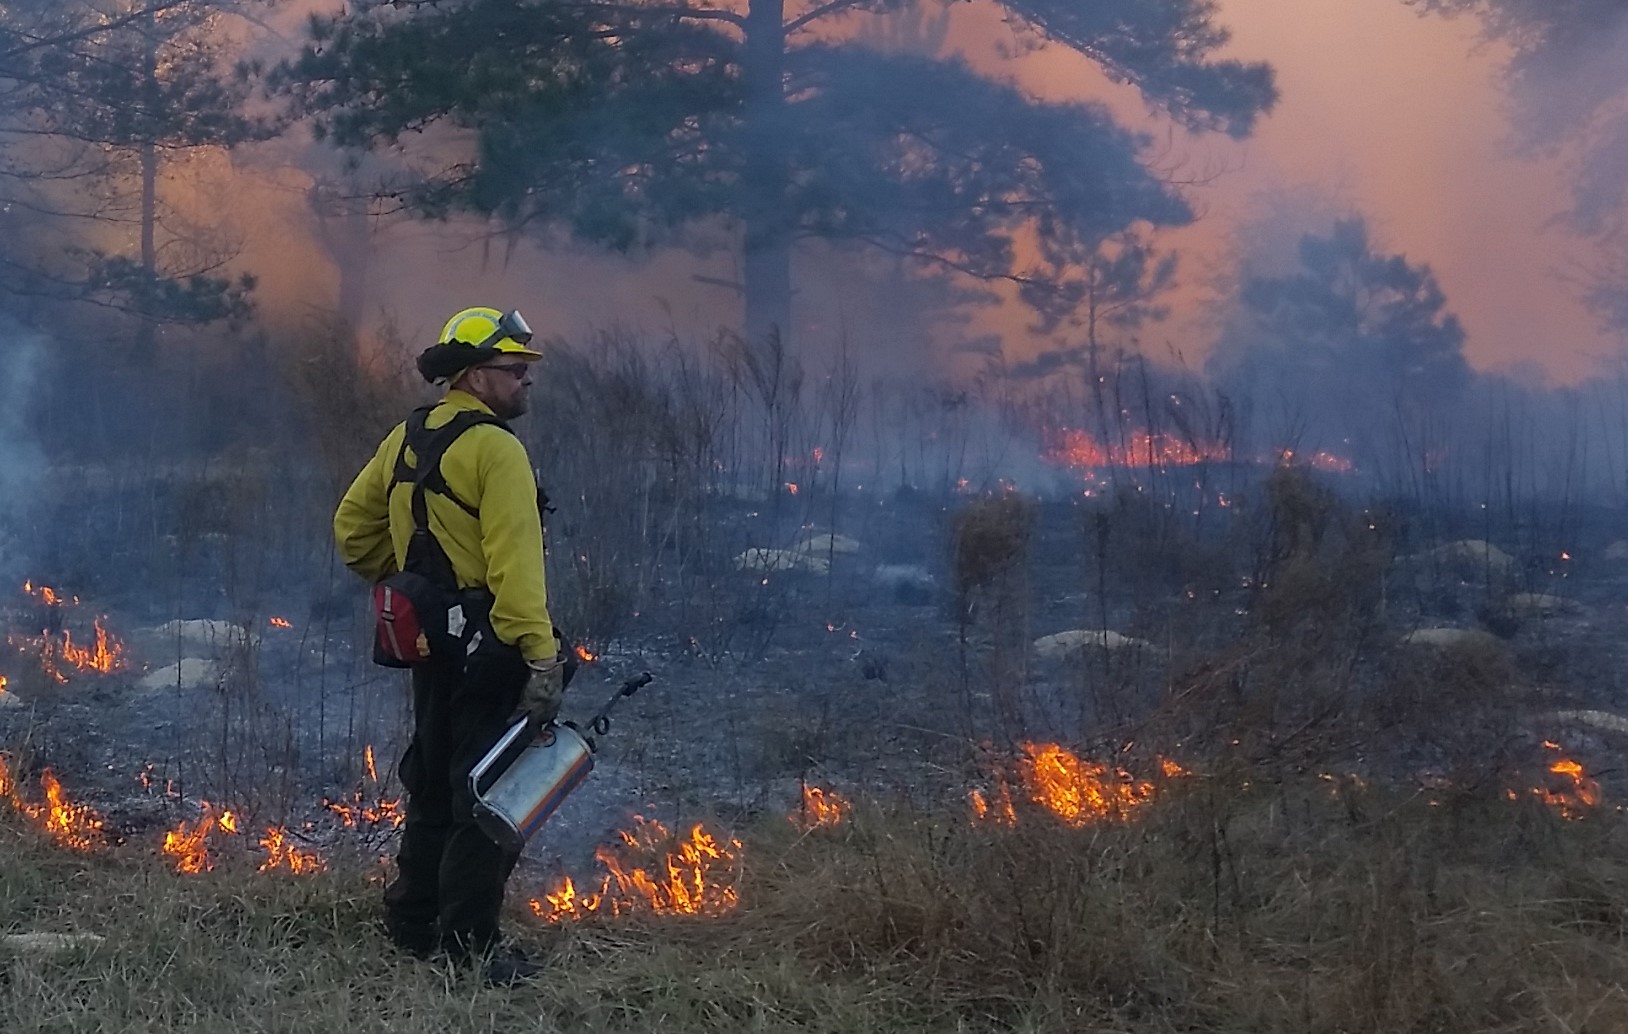 A view of a fire expert applying a controlled burn.